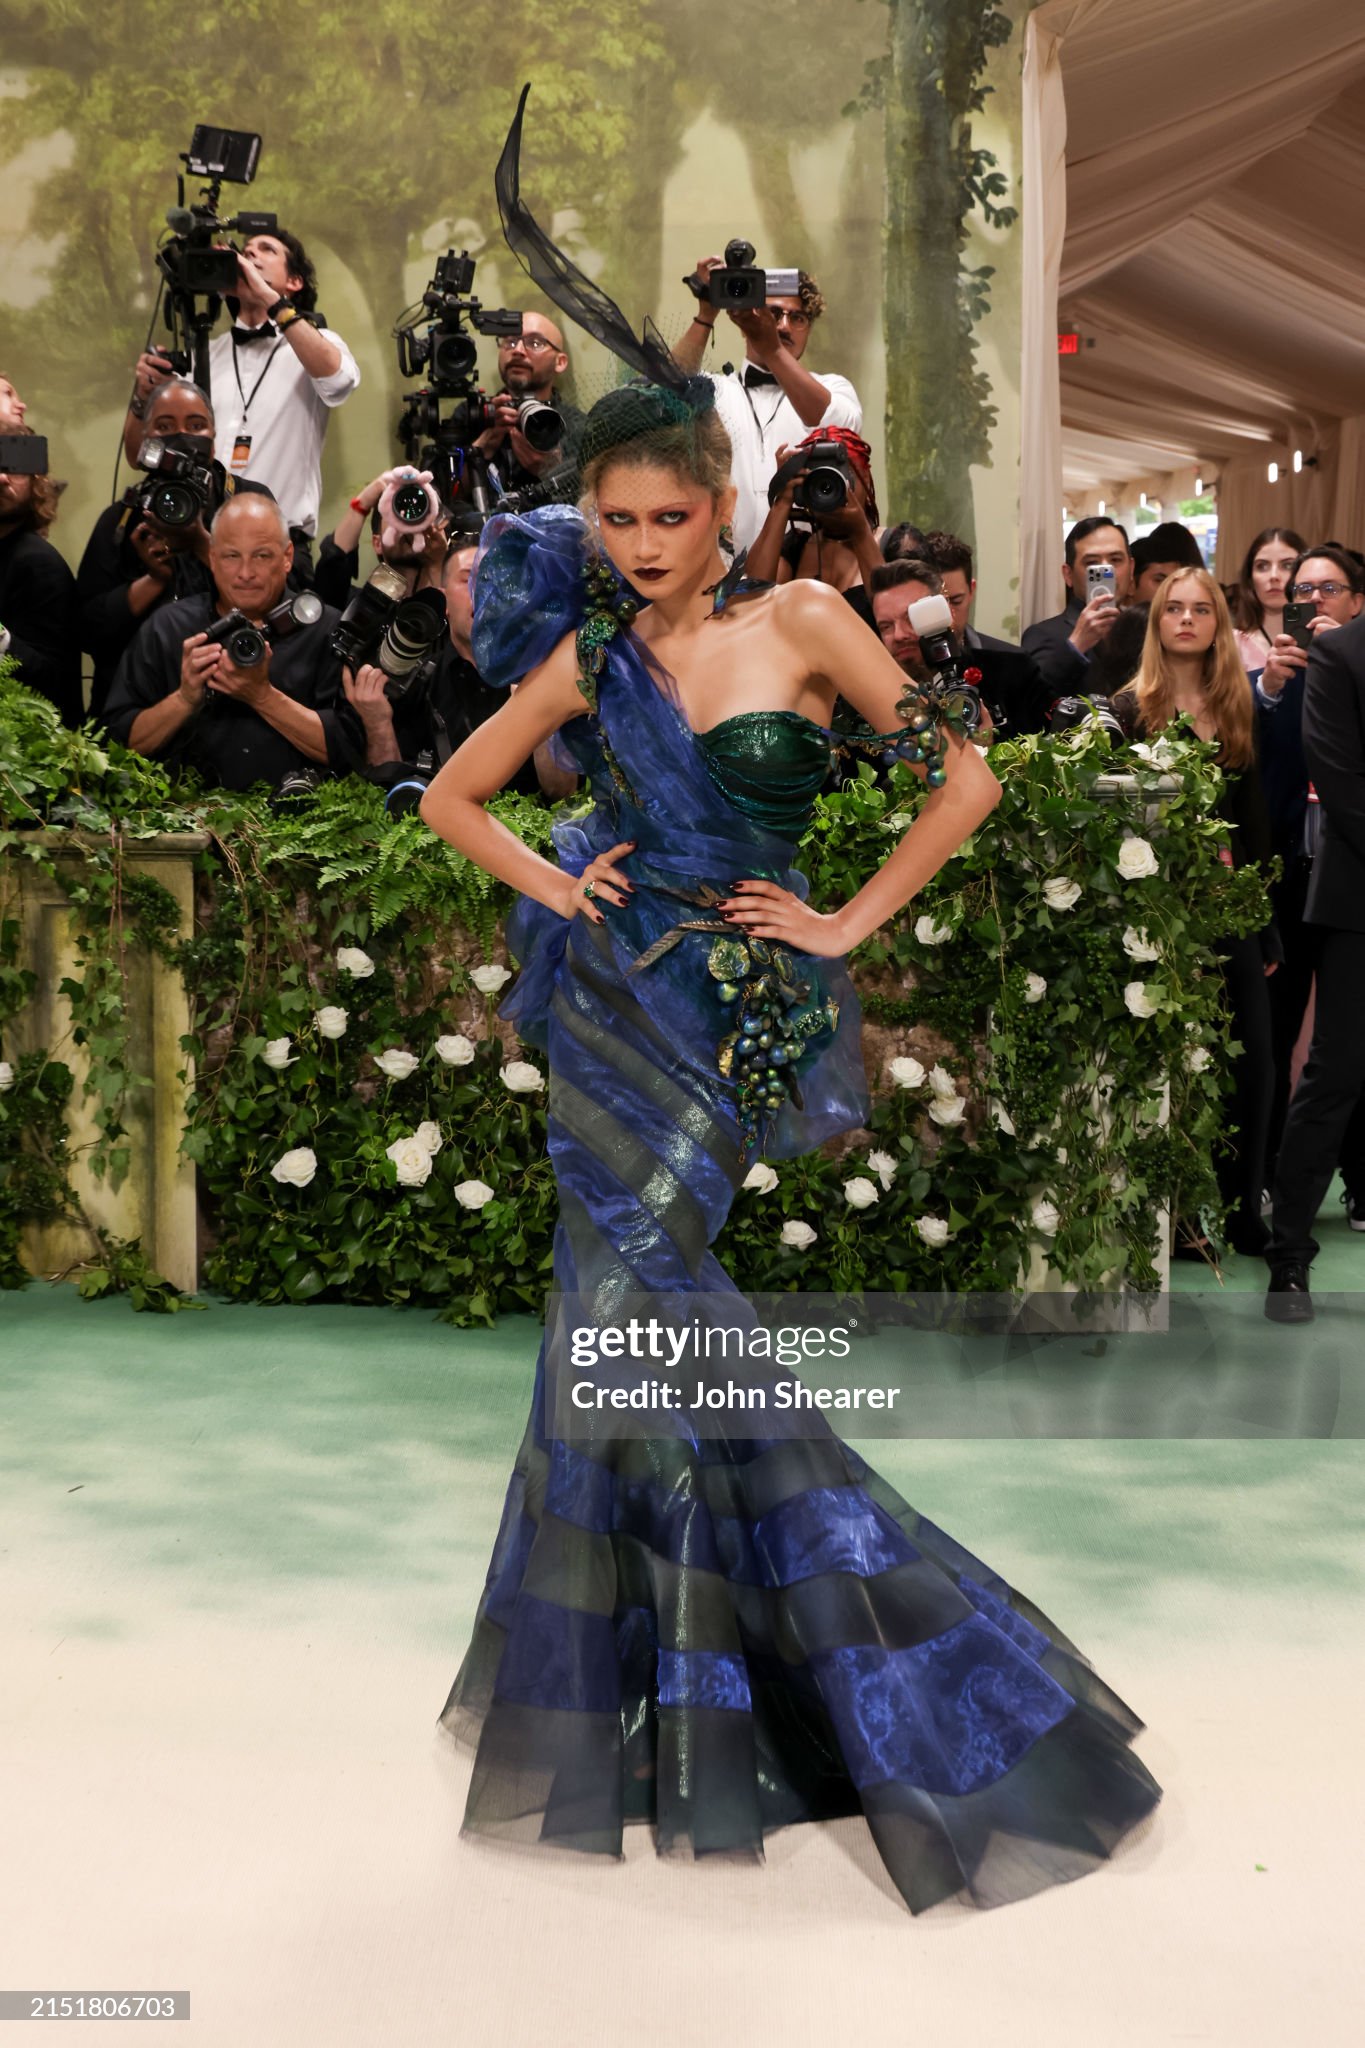 gettyimages-2151806703-2048x2048.jpg